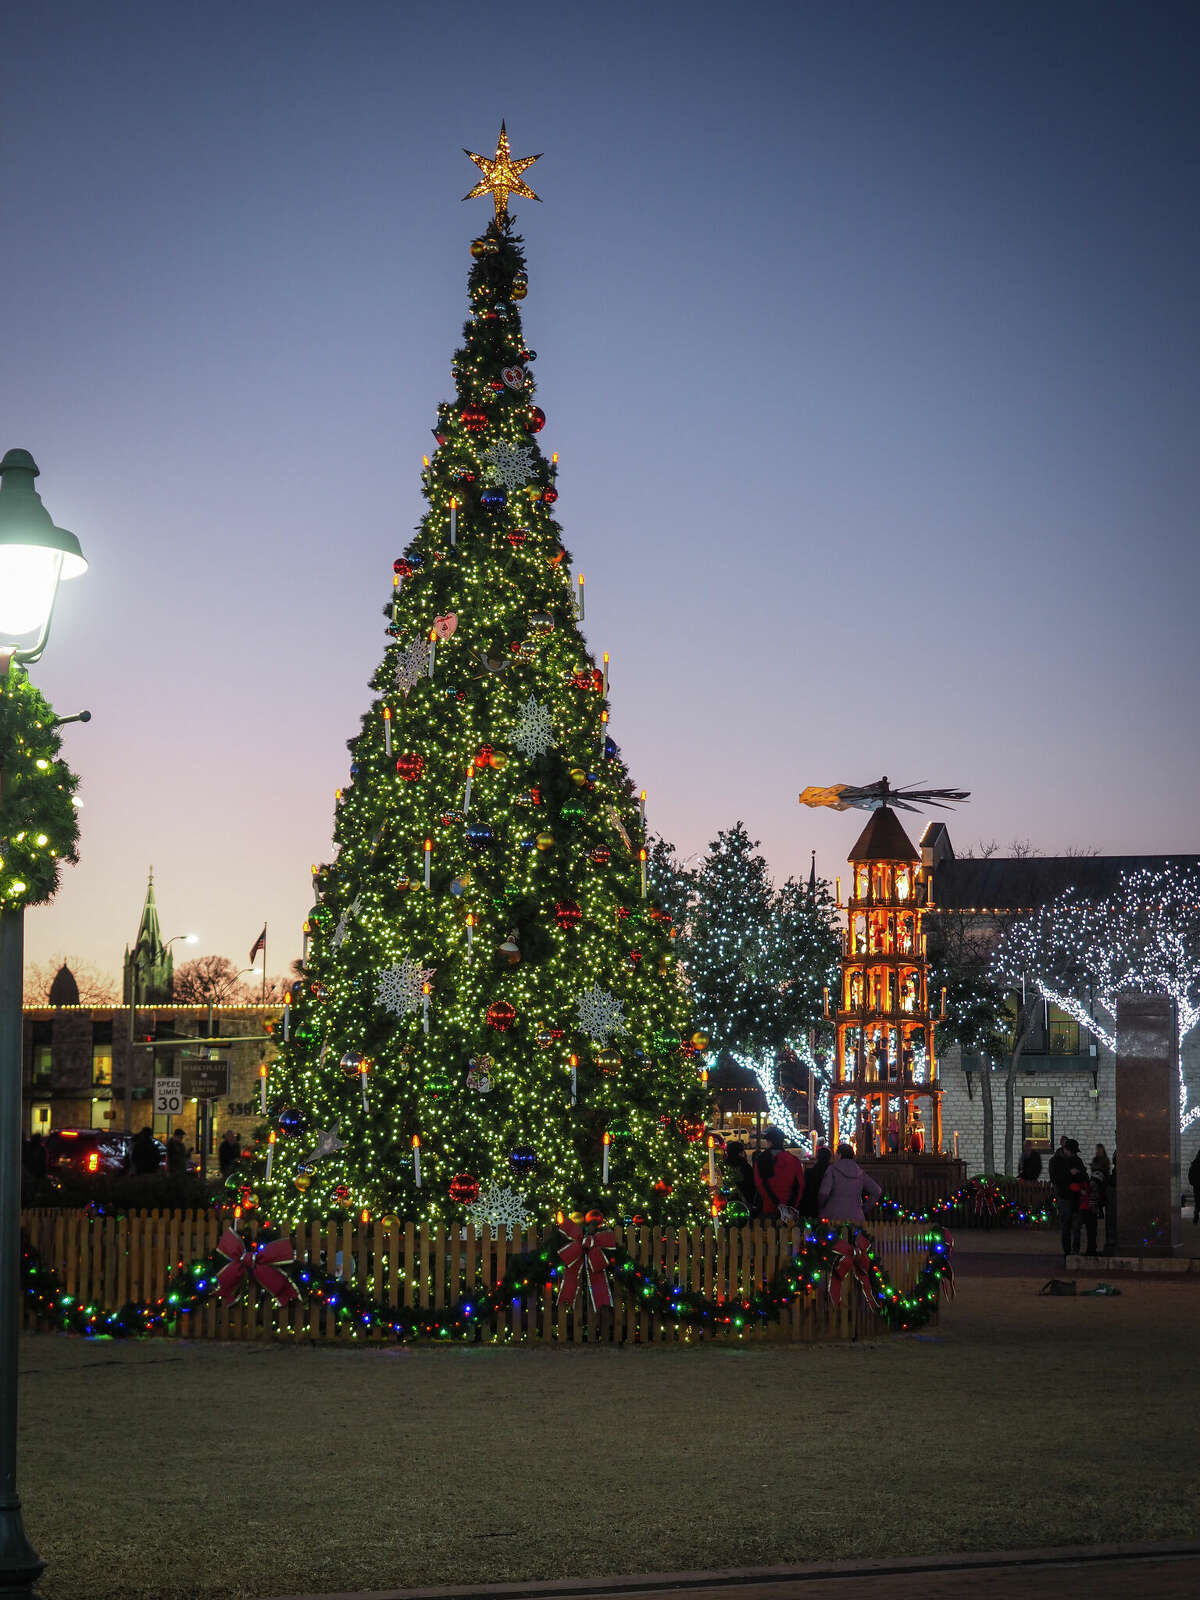 The city of Fredericksburg has a huge Christmas tree every year.